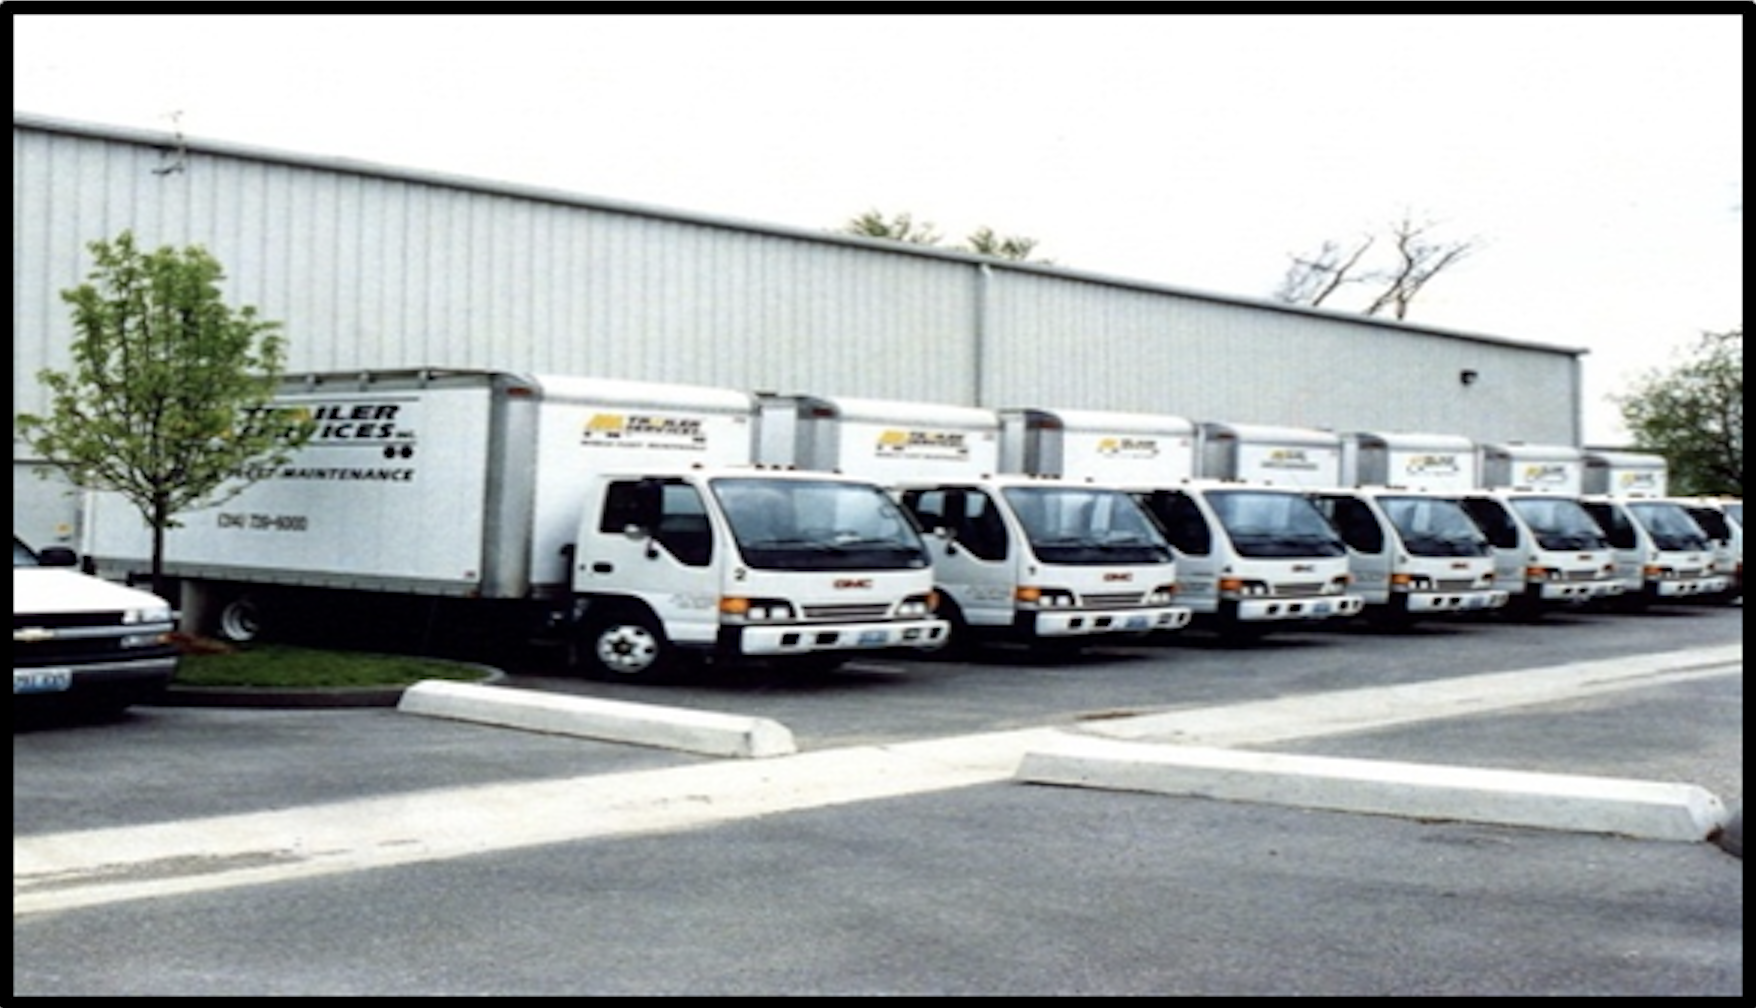 AAA mobile trailer service trucks ready to roll